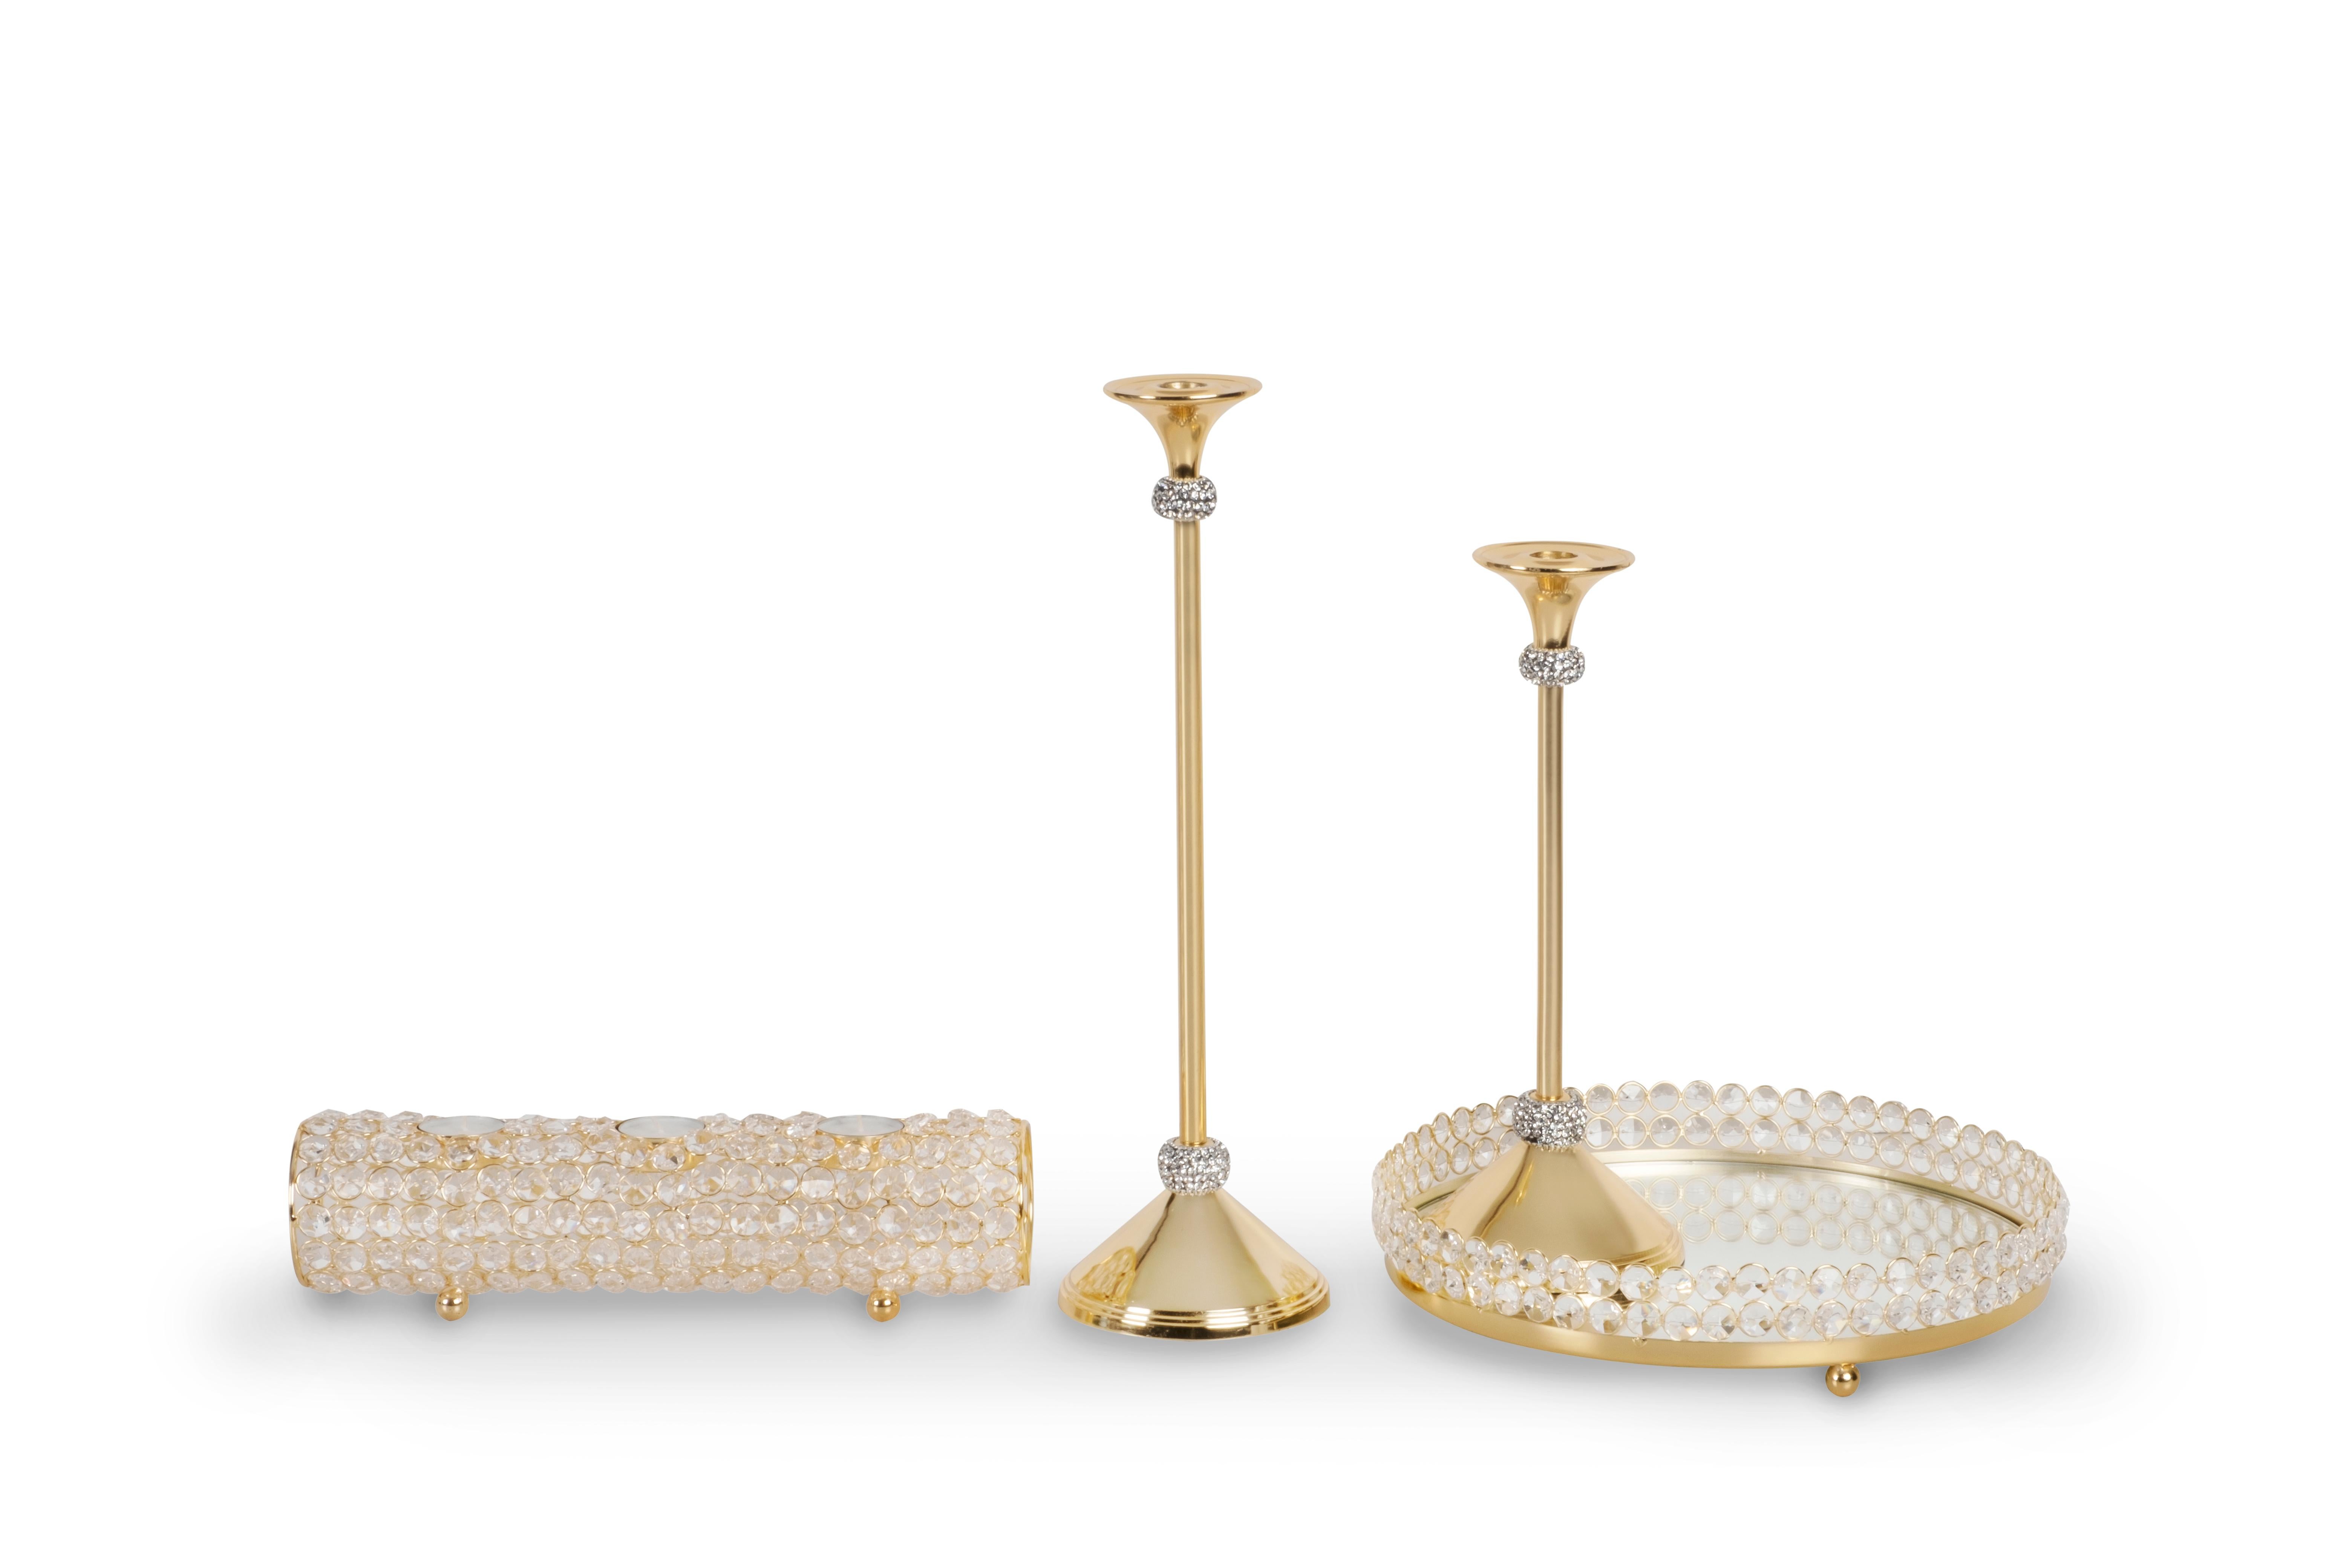 Portuguese Decorative Candleholders & Tray, Golden Nickel, Handmade by Lusitanus Home For Sale